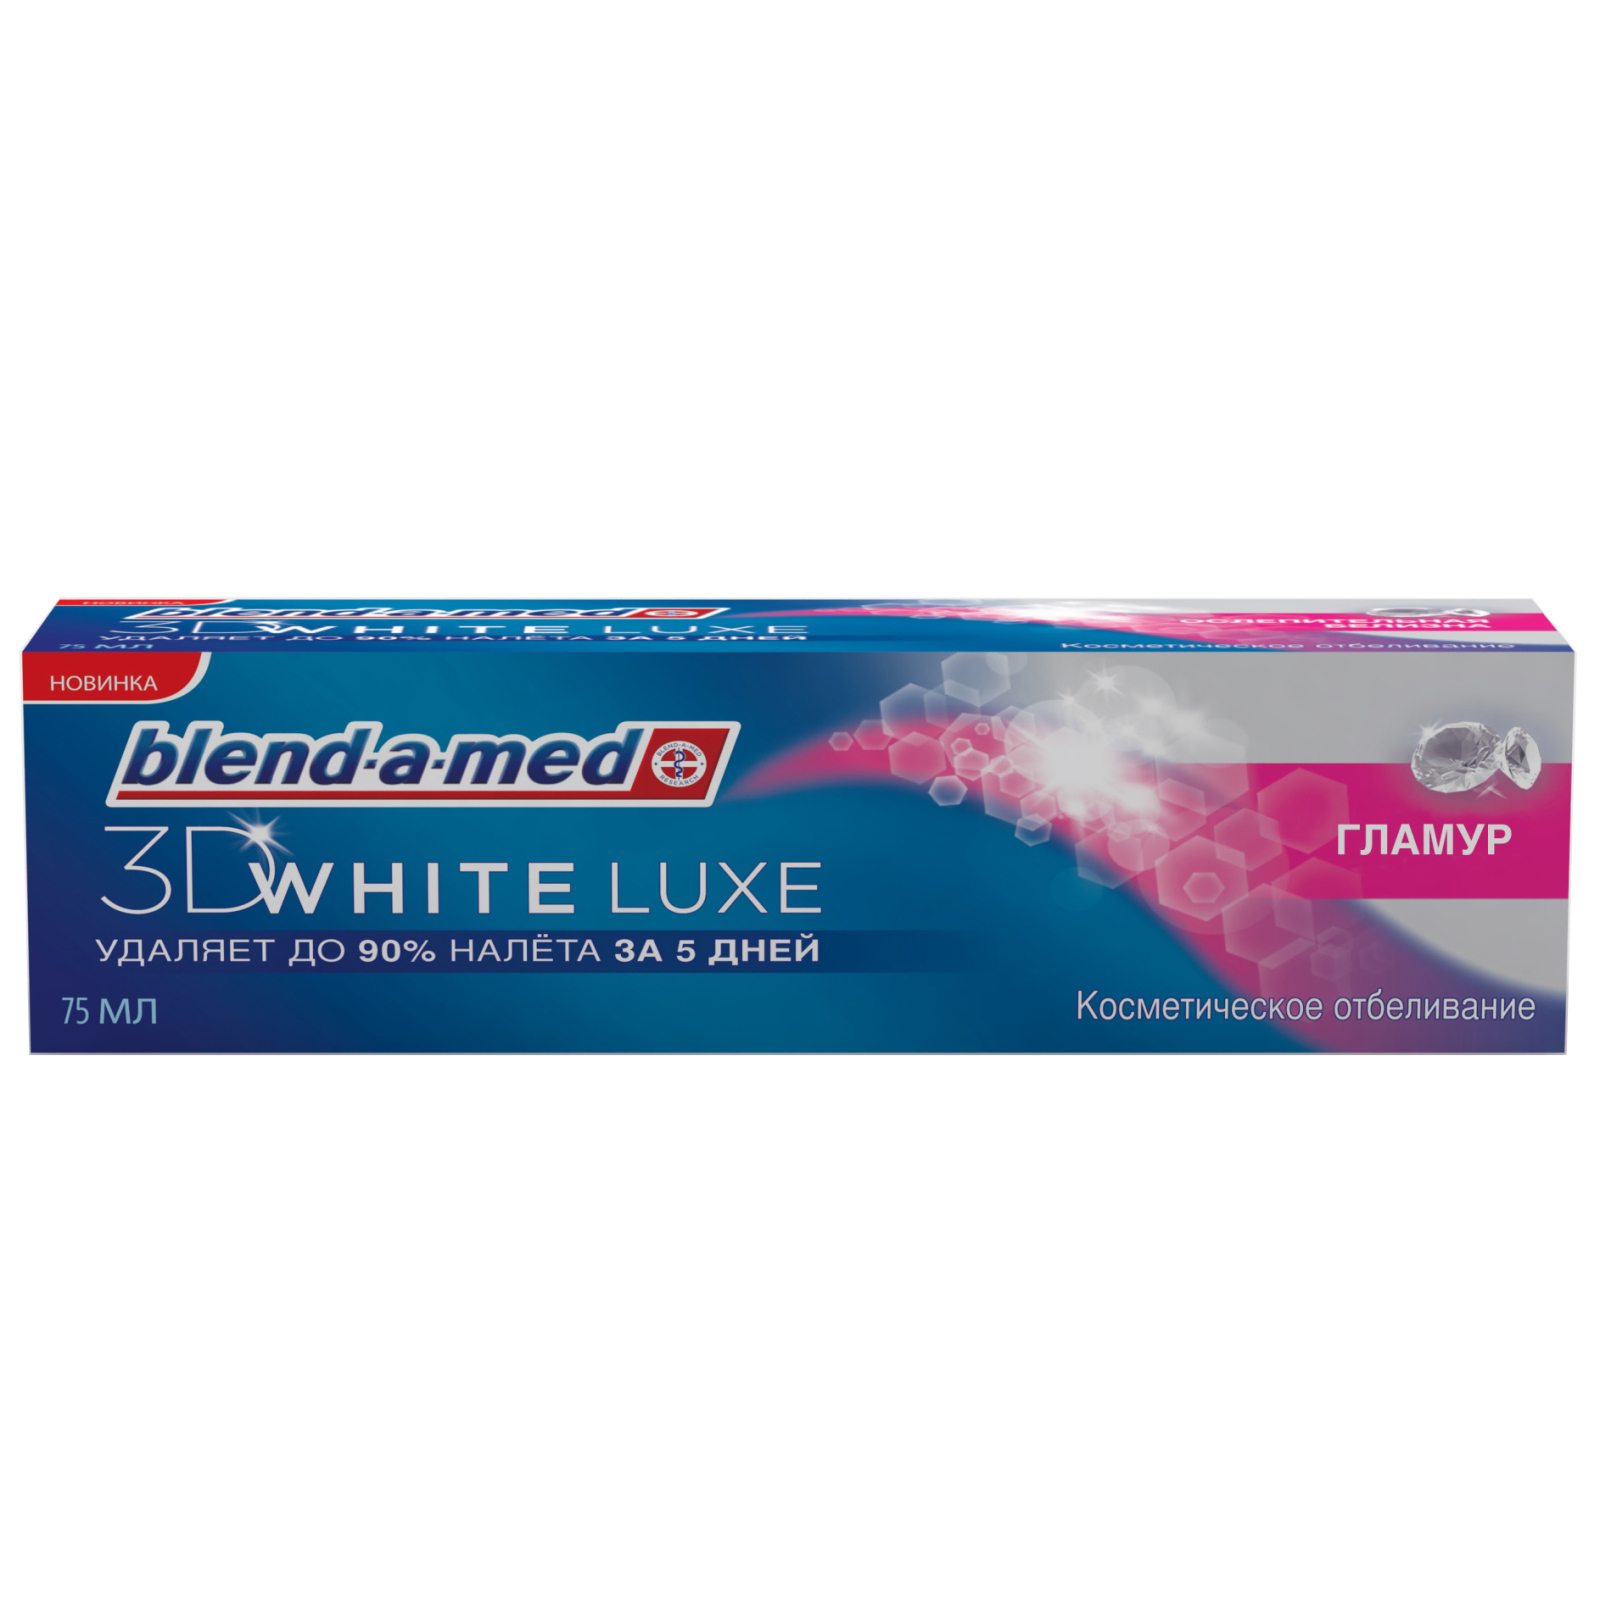 Зубна паста Blend-a-med 3D White Luxe Гламур 75 мл (5410076893454)